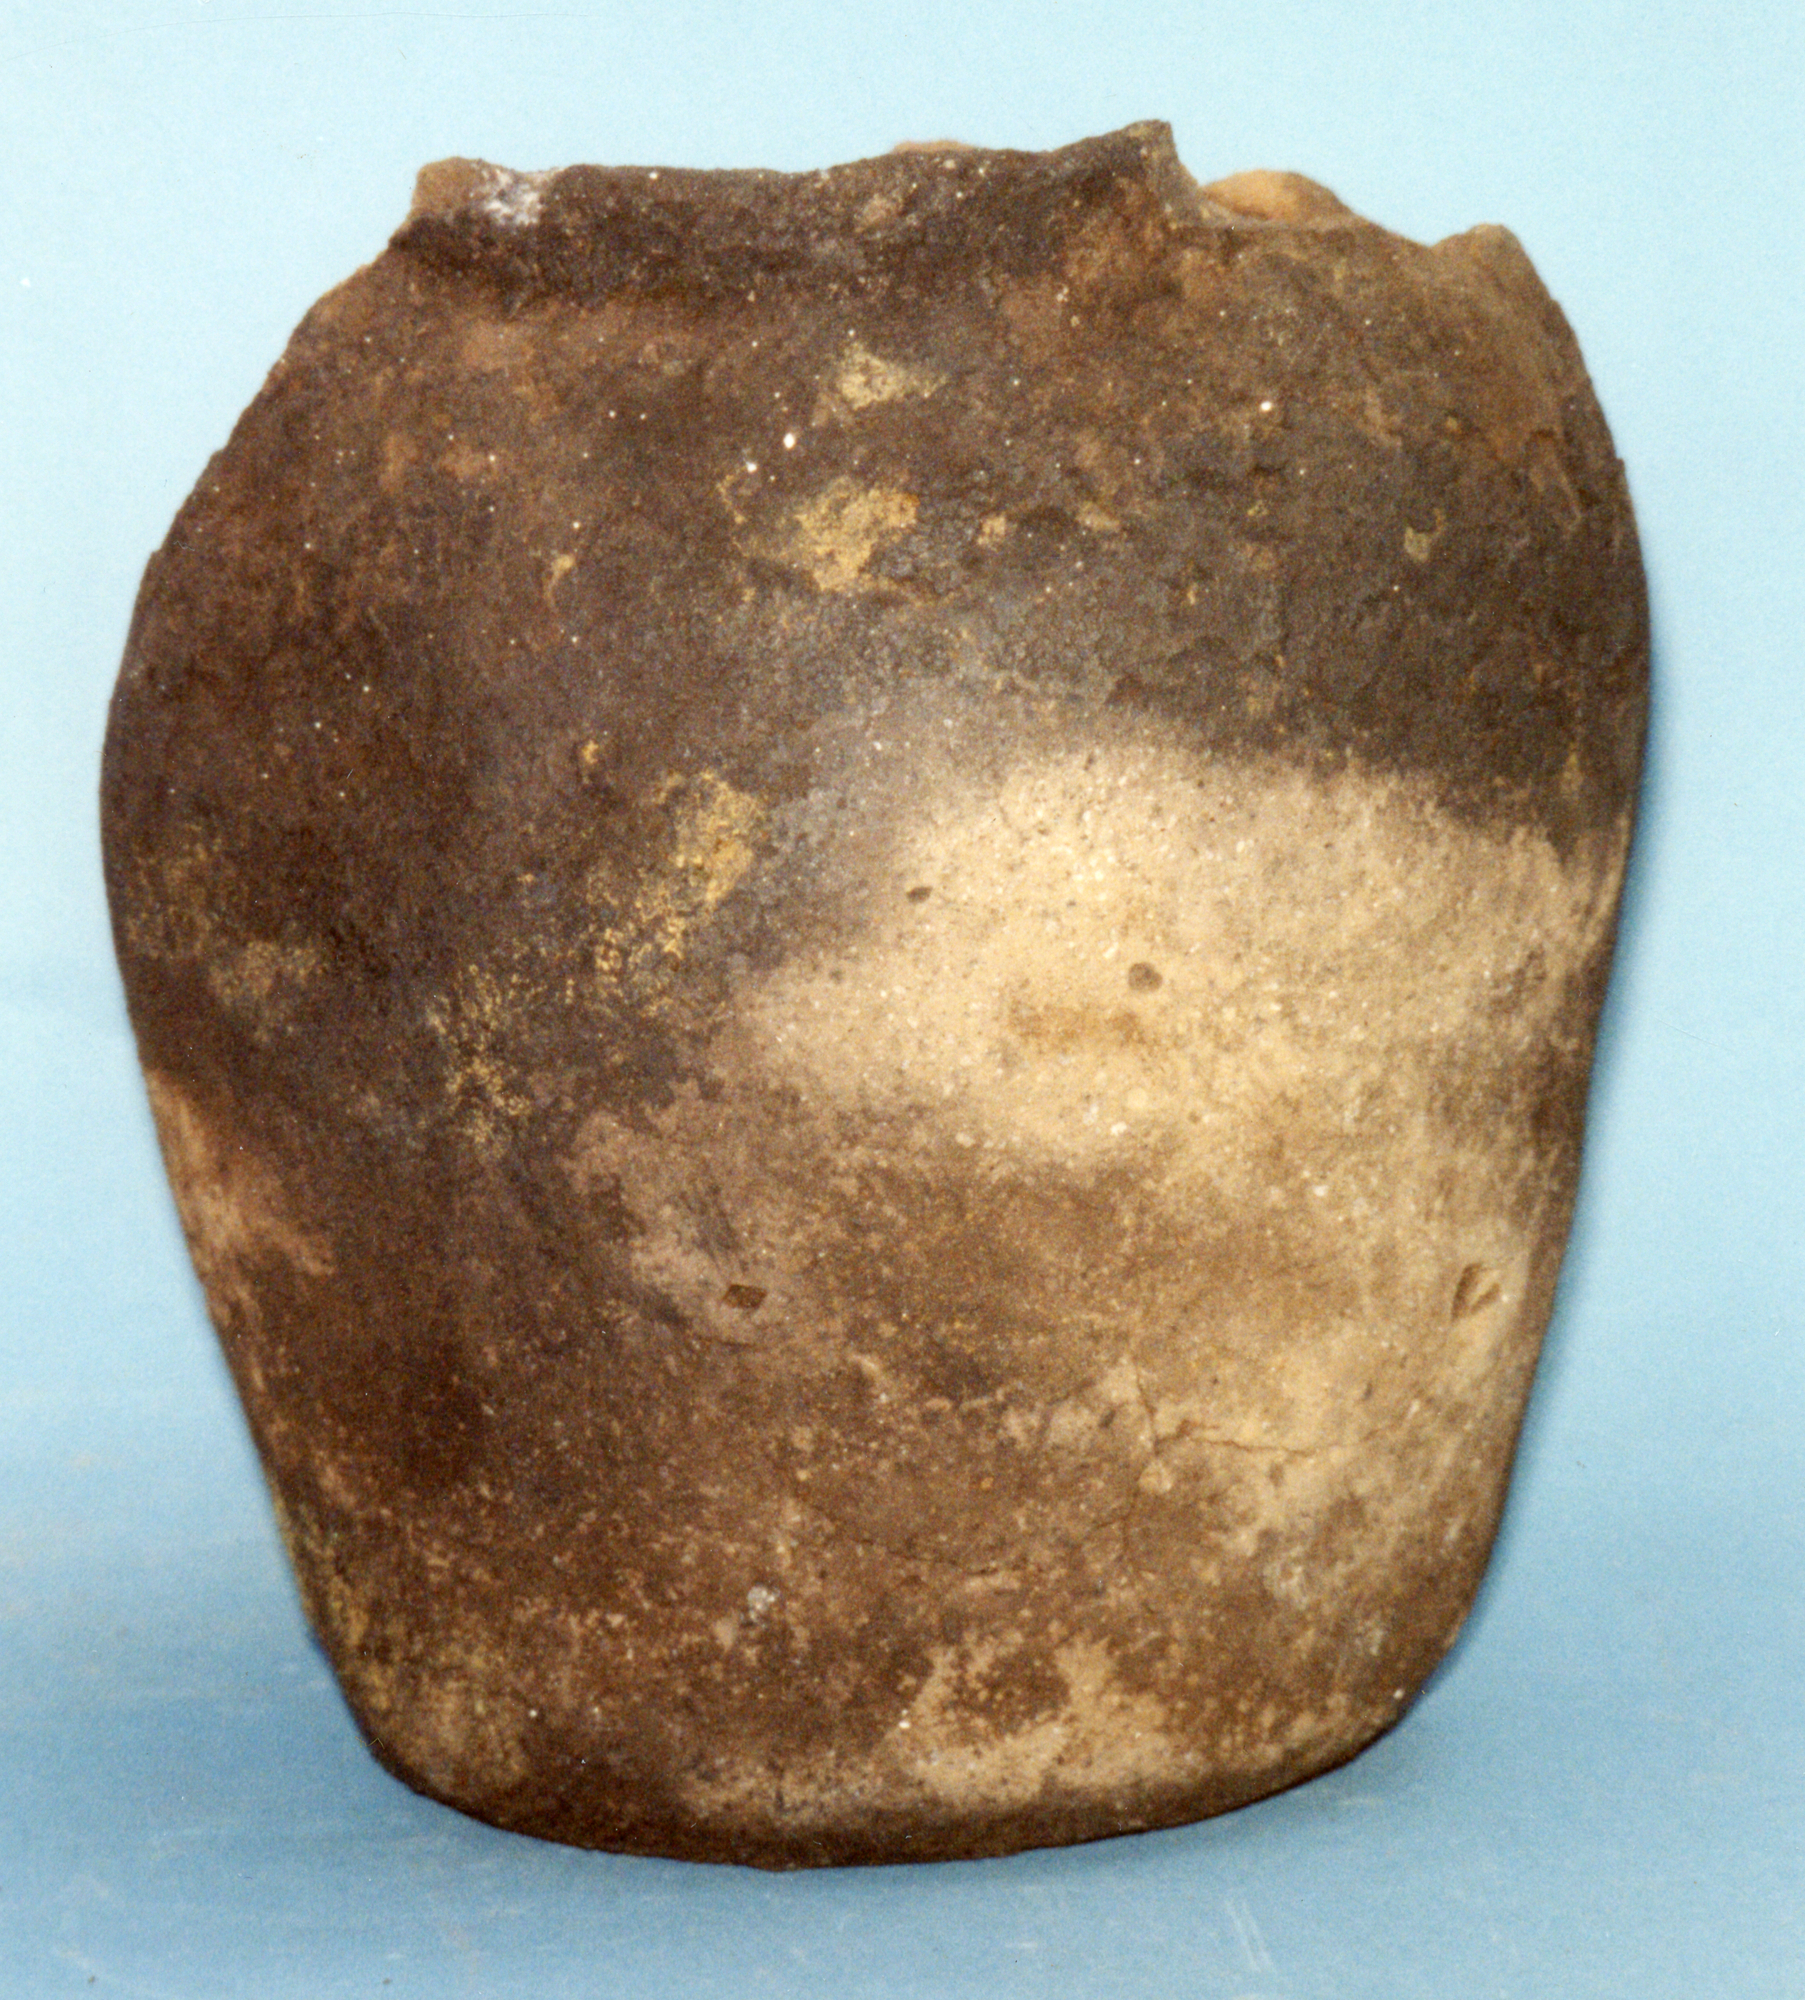 Image of Pottery vessel, nearly complete, with organic deposits on the external surface, found in a peat bank at Camus-a-Bhualta, Harris © National Museums Scotland